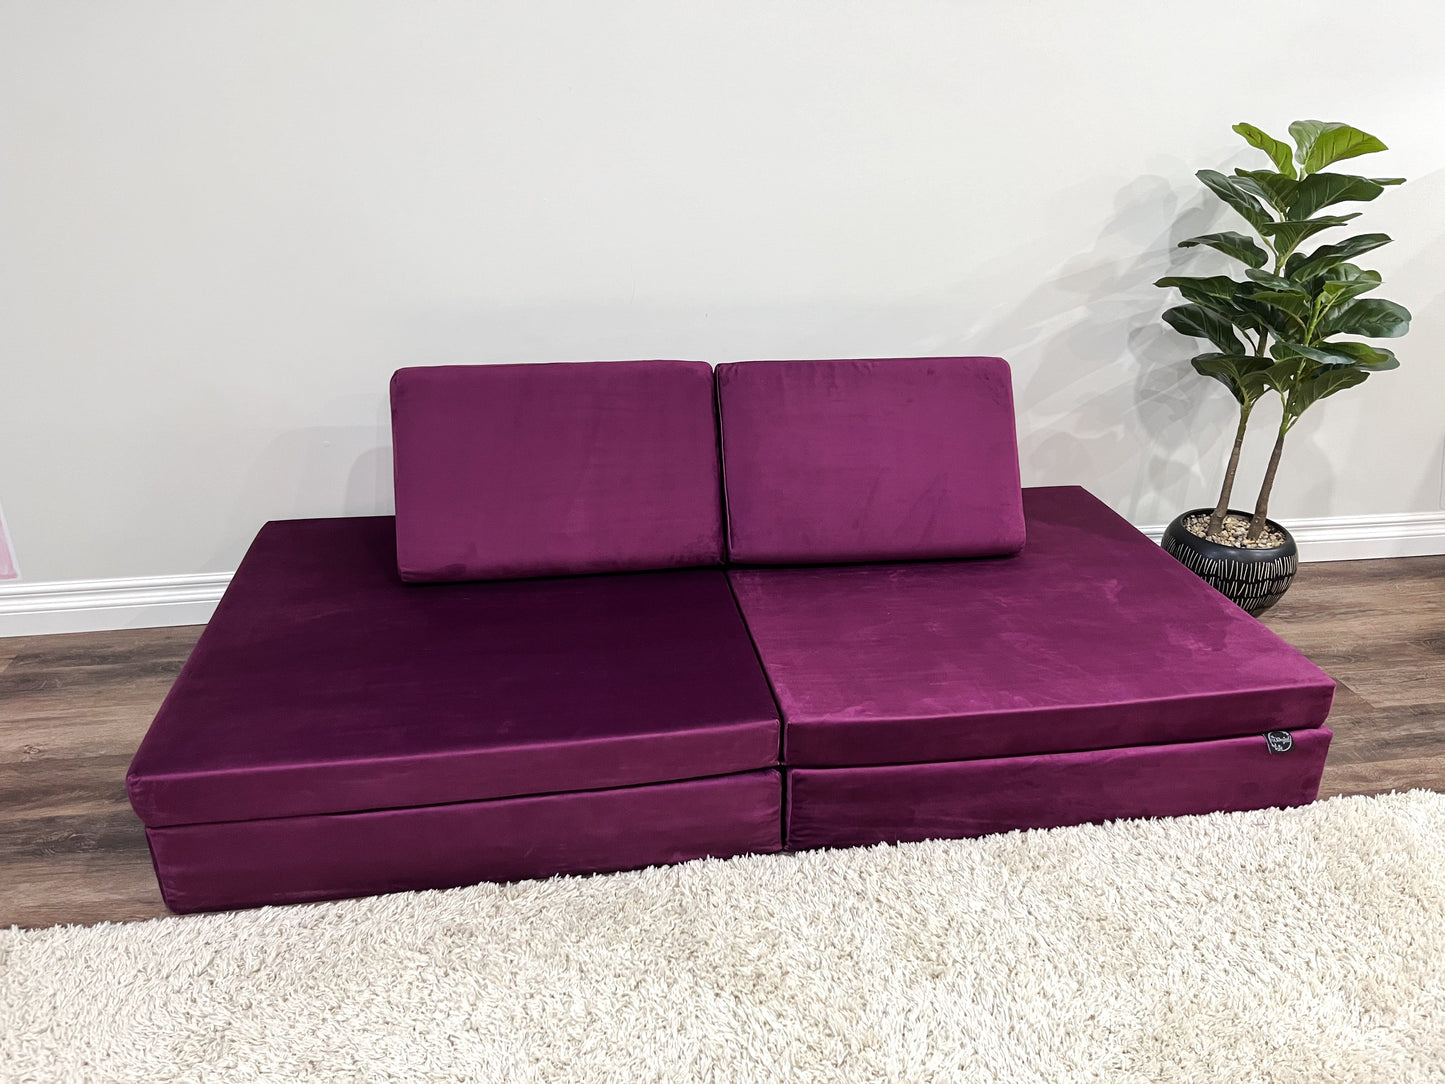 Playcouch Covers - Elderberry